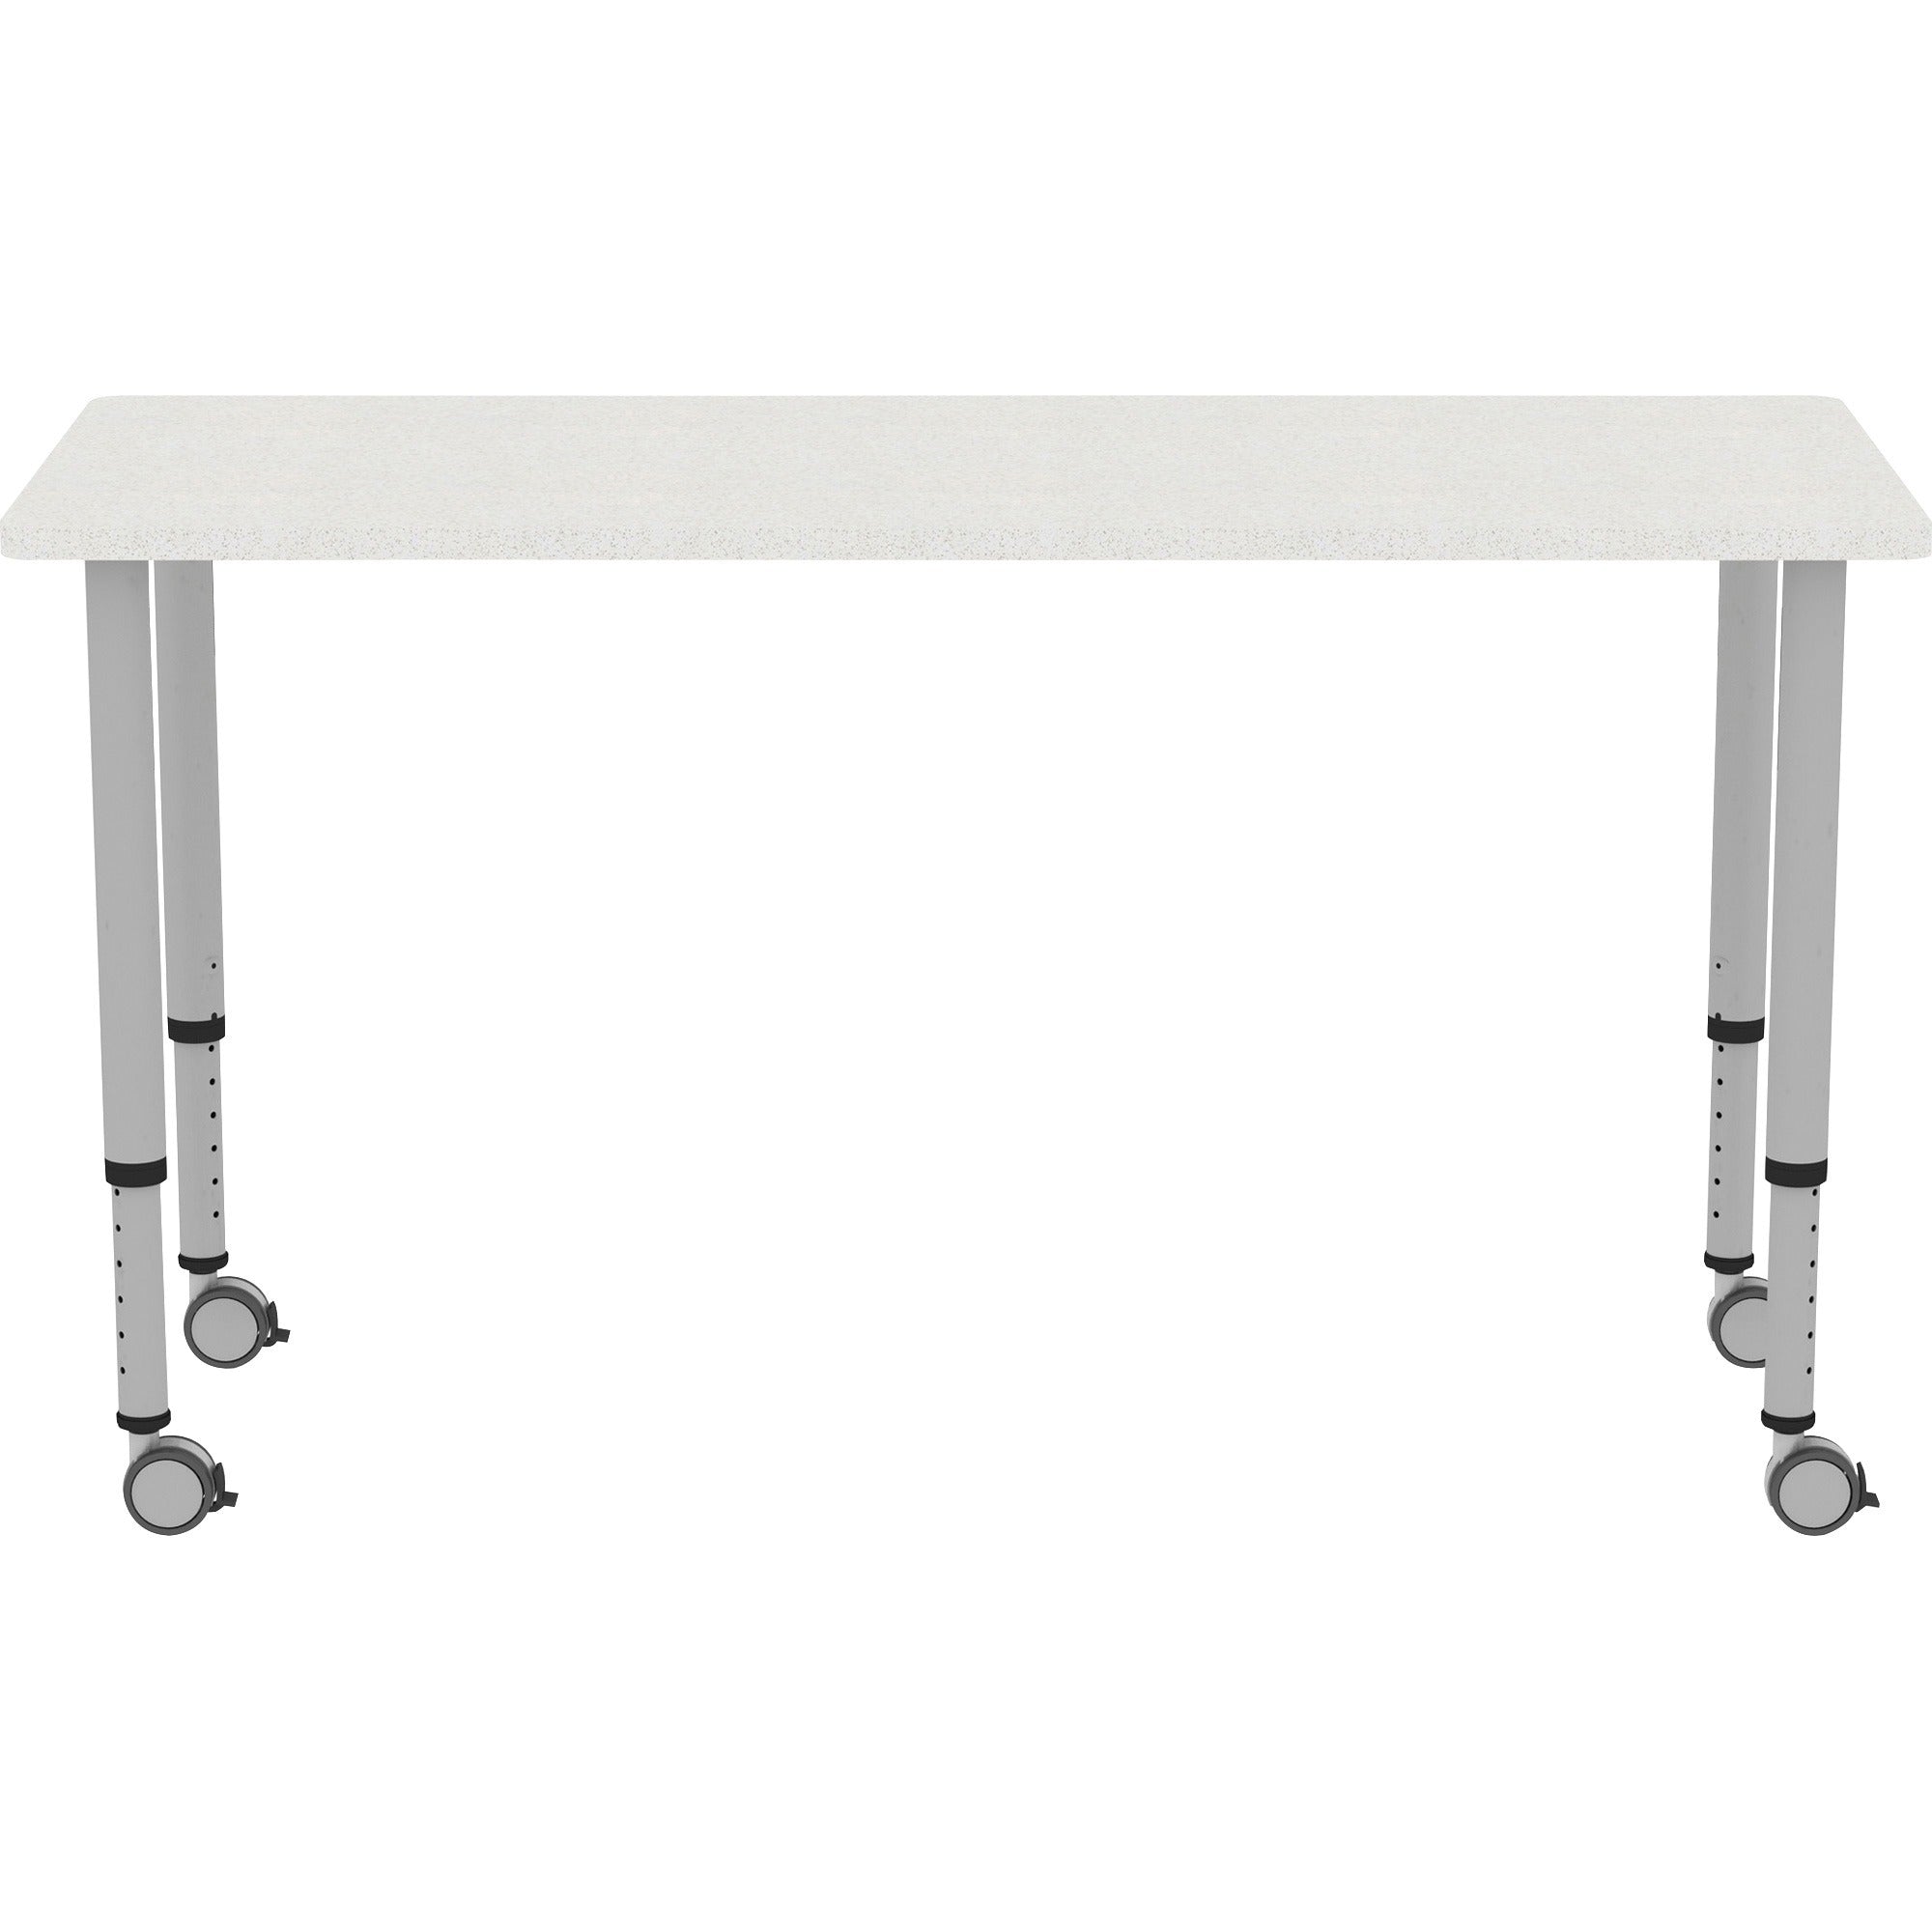 lorell-attune-height-adjustable-multipurpose-rectangular-table-for-table-toprectangle-top-adjustable-height-2662-to-3362-adjustment-x-60-table-top-width-x-2362-table-top-depth-3362-height-assembly-required-laminated-gray-lam_llr69579 - 3